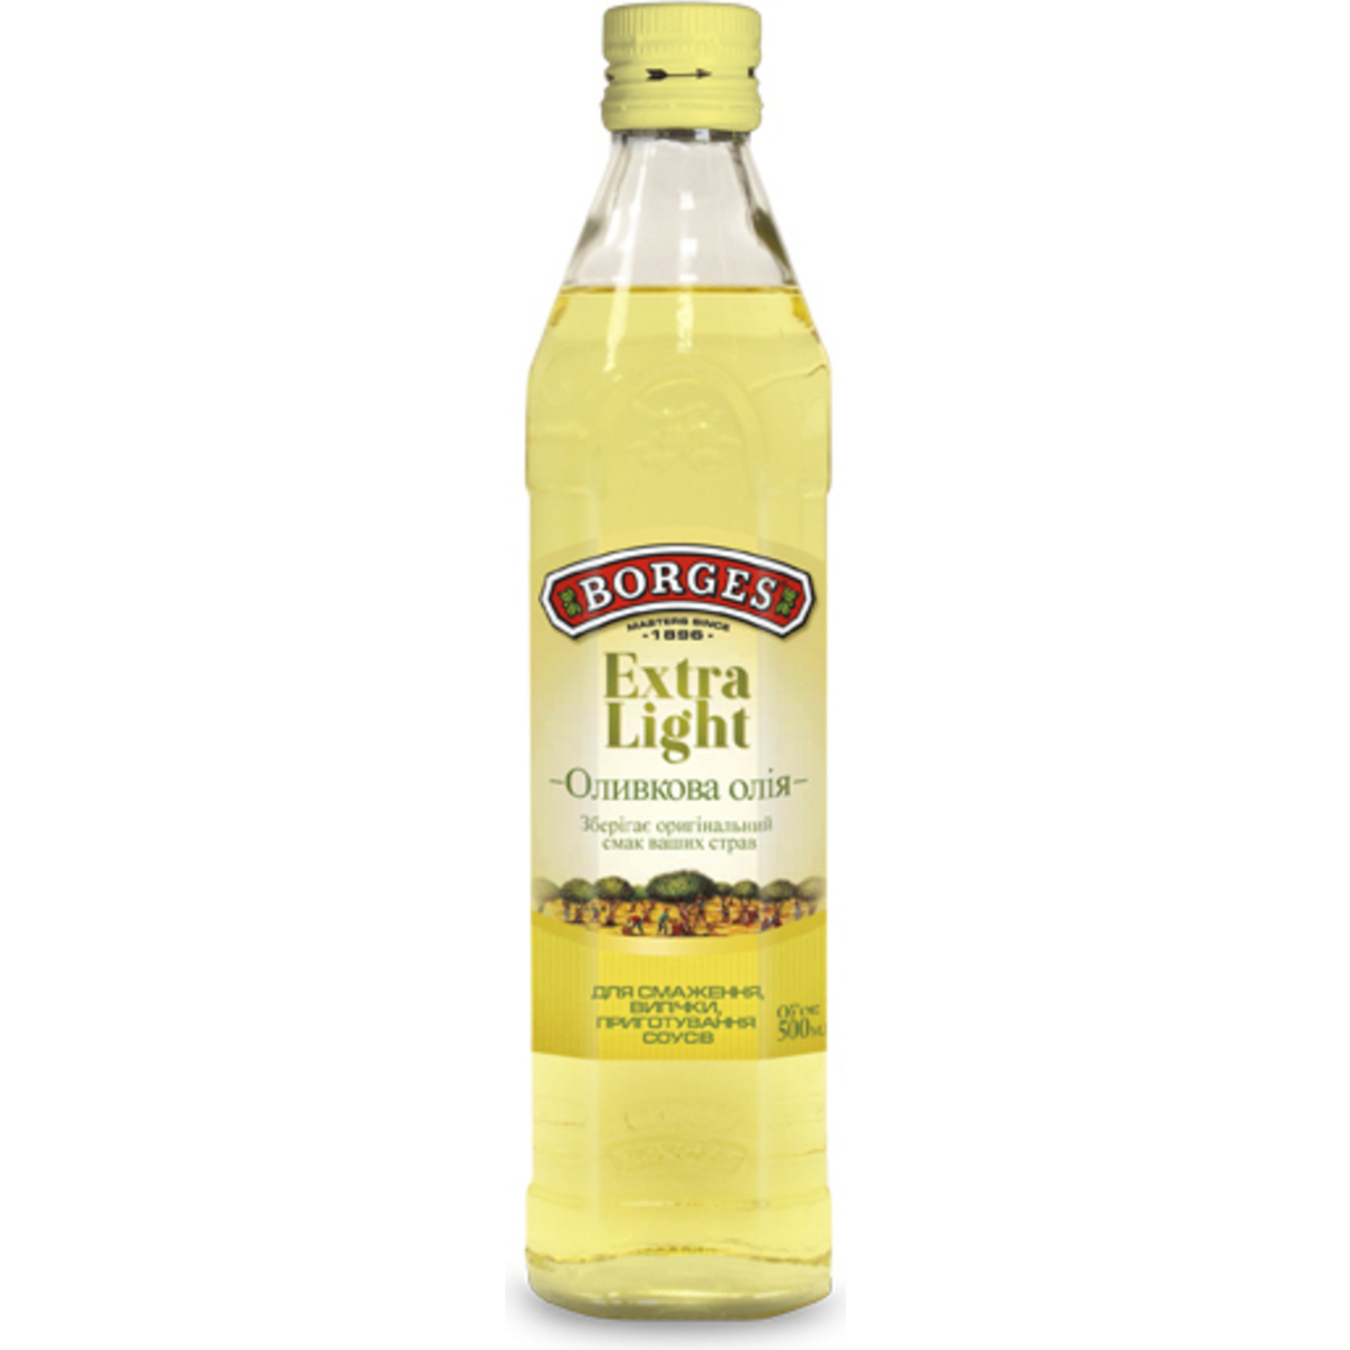 Borges Extra Light Olive Oil 500ml glass